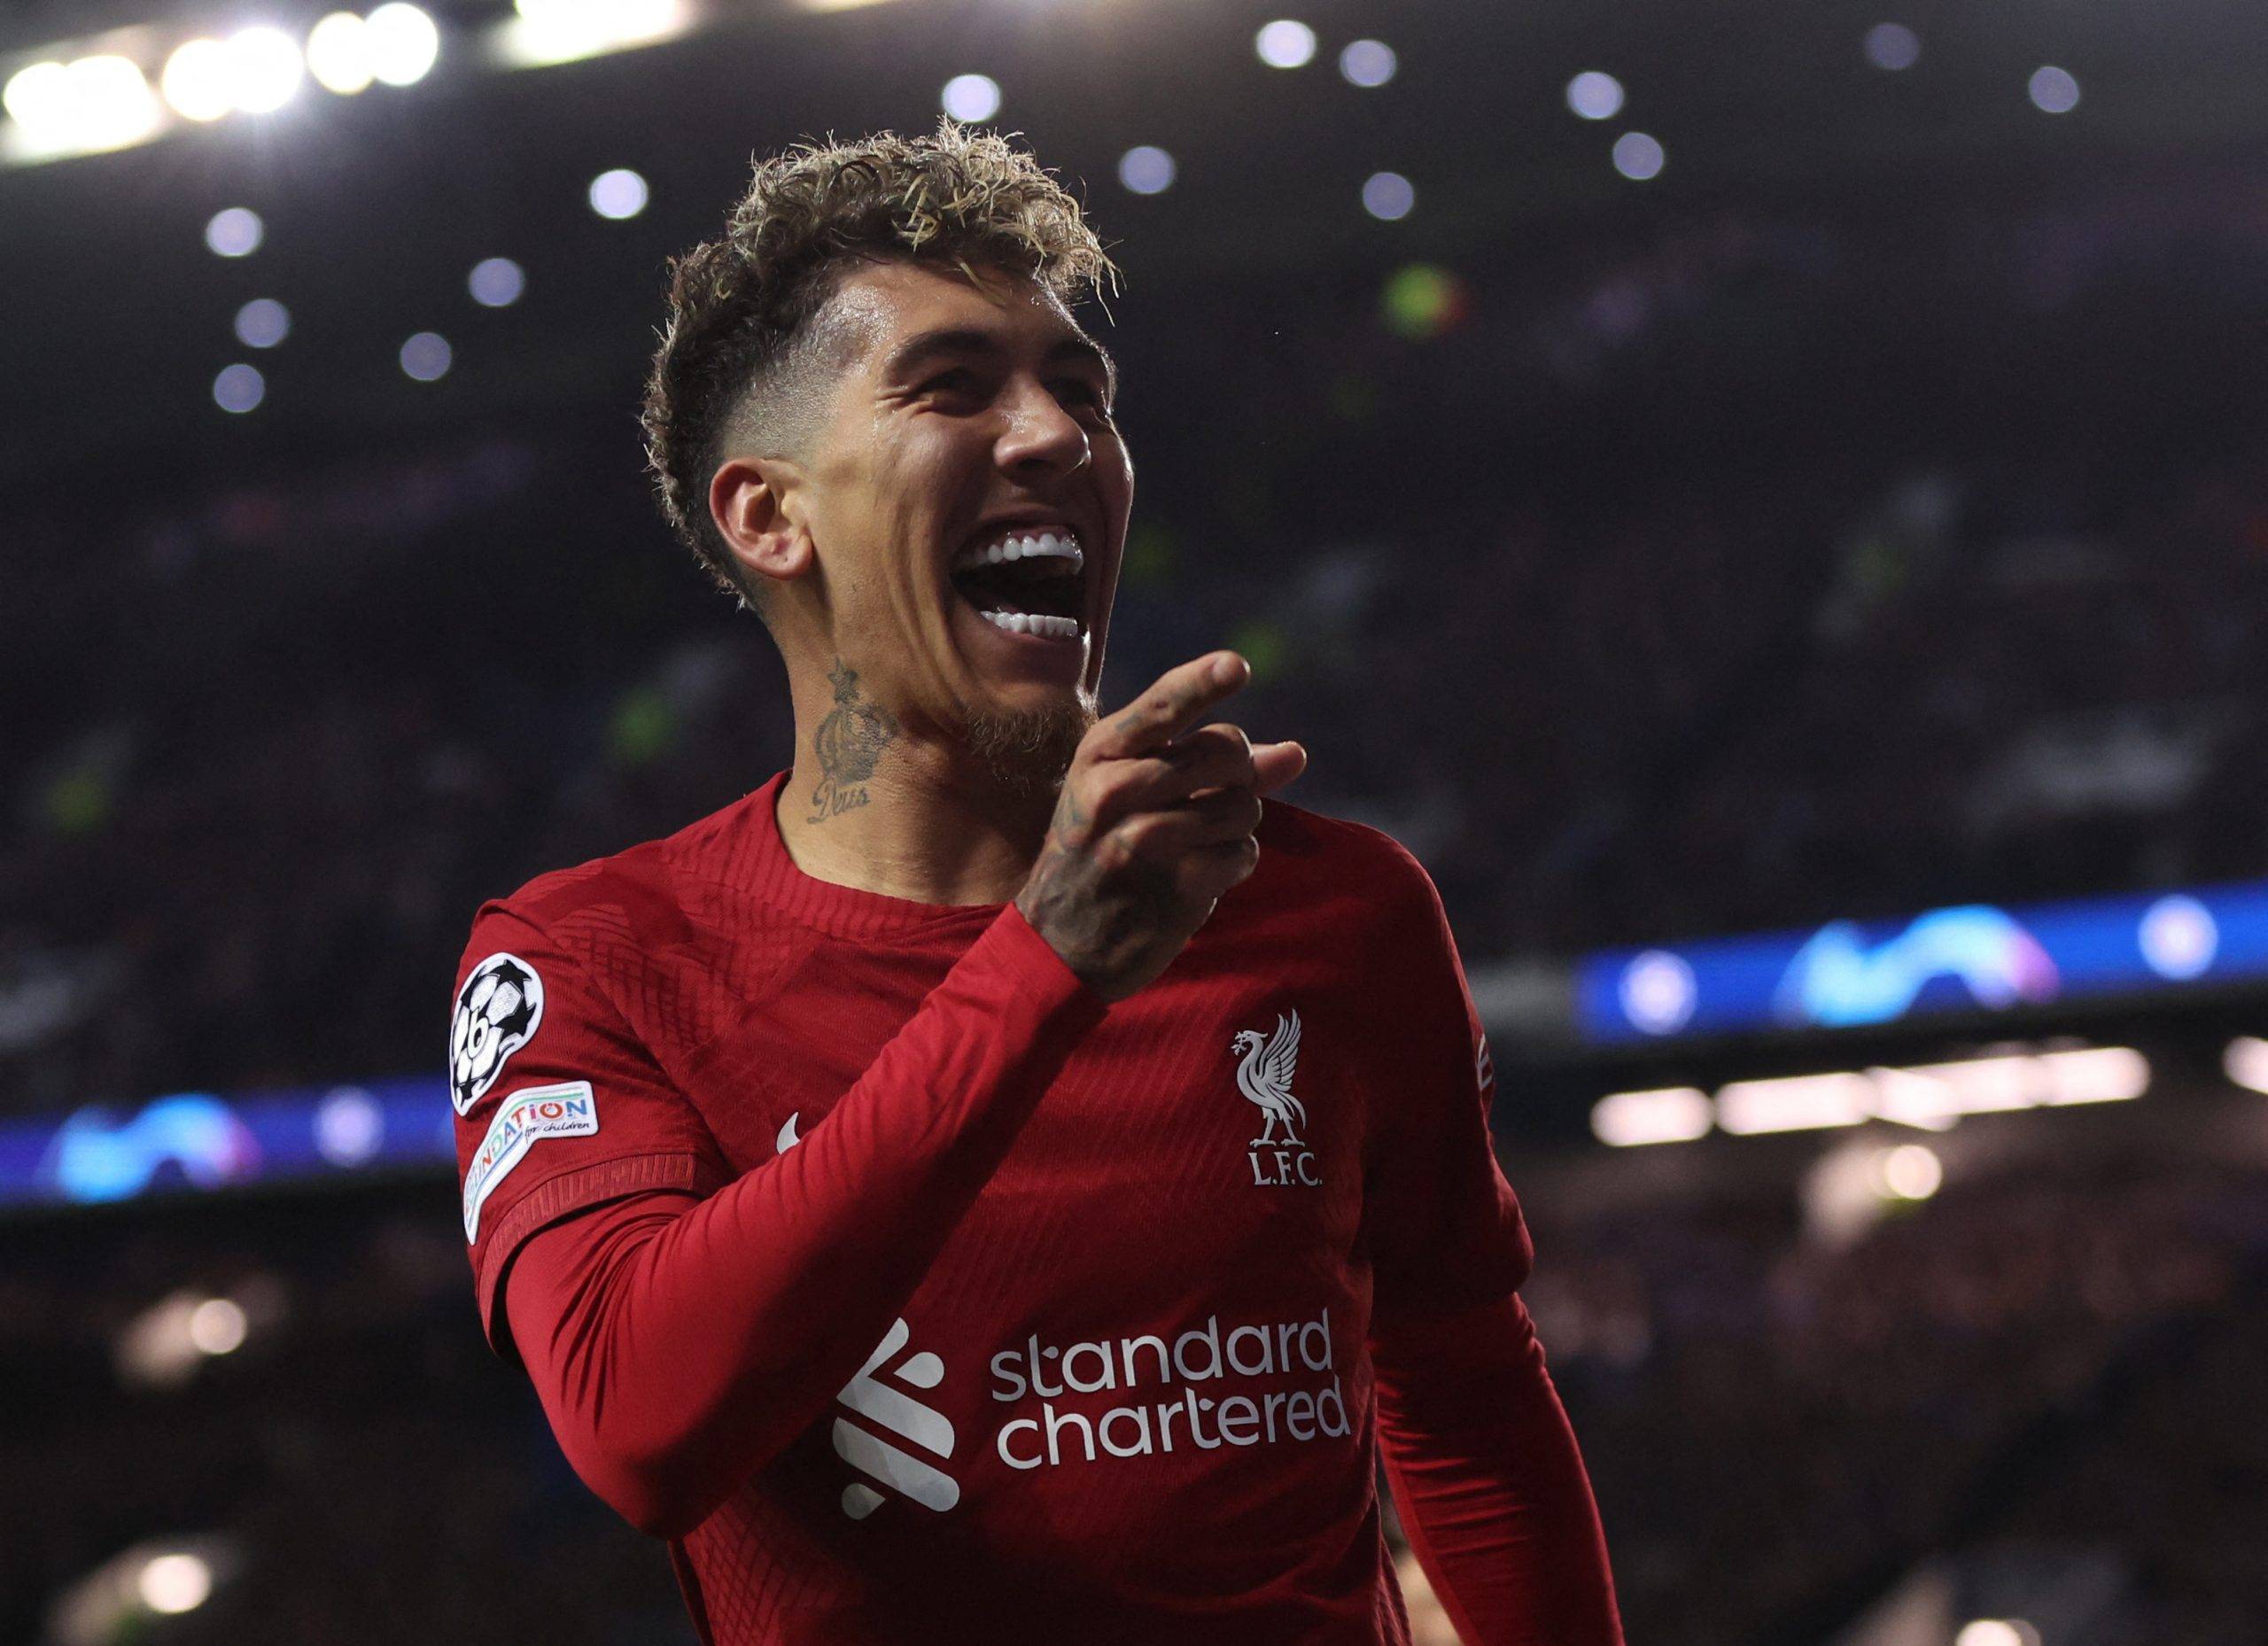 Liverpool: Klopp will be 'asking' for new Roberto Firmino deal - Follow up